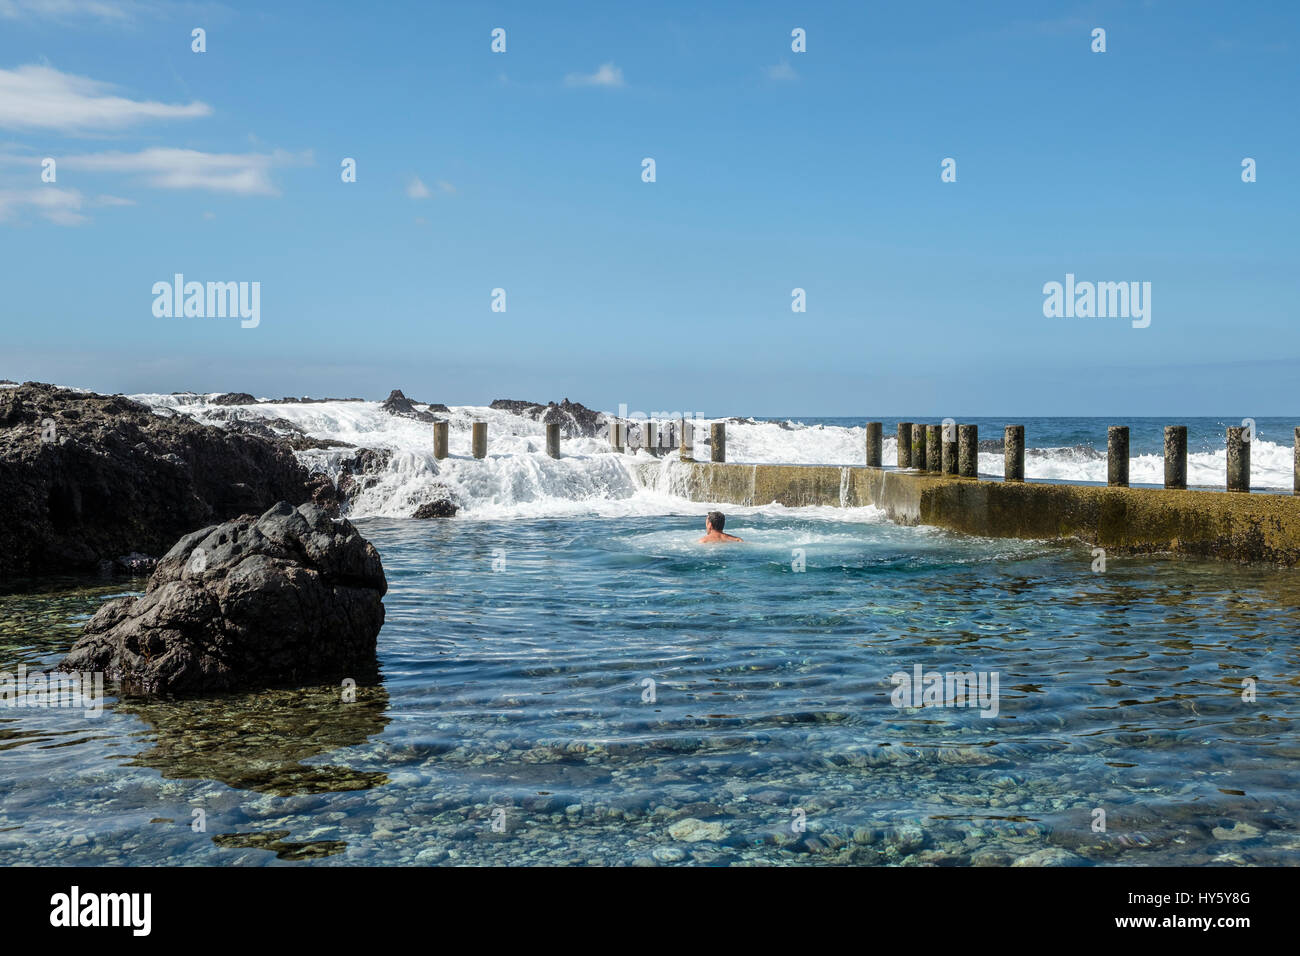 A swimmer enjoys a refreshing dip in the still clear blue waters of a natural rock pool on the Tenerife coast near Alcala while waves from the Atlanti Stock Photo